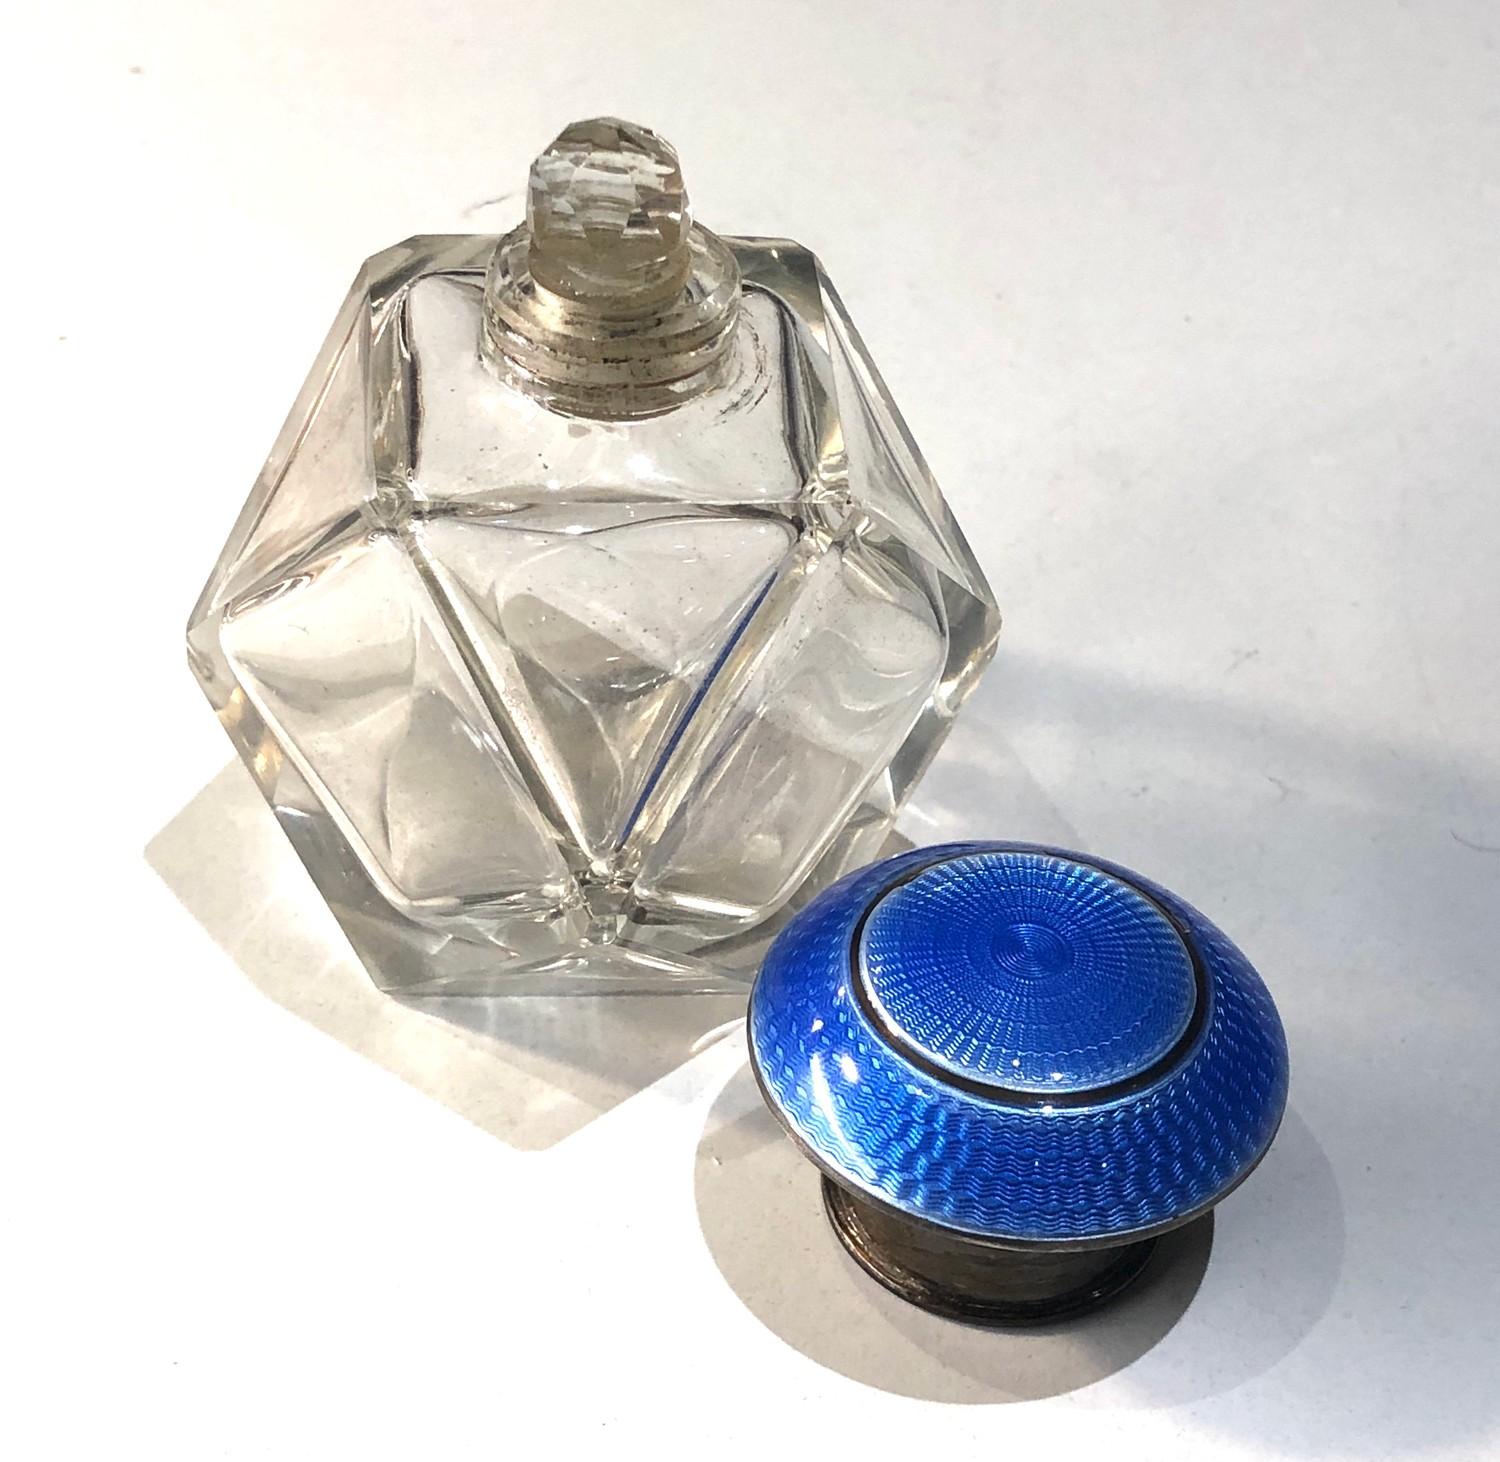 Antique silver and enamel top perfume bottle measures approx height 8cm complete with stopper - Image 2 of 6